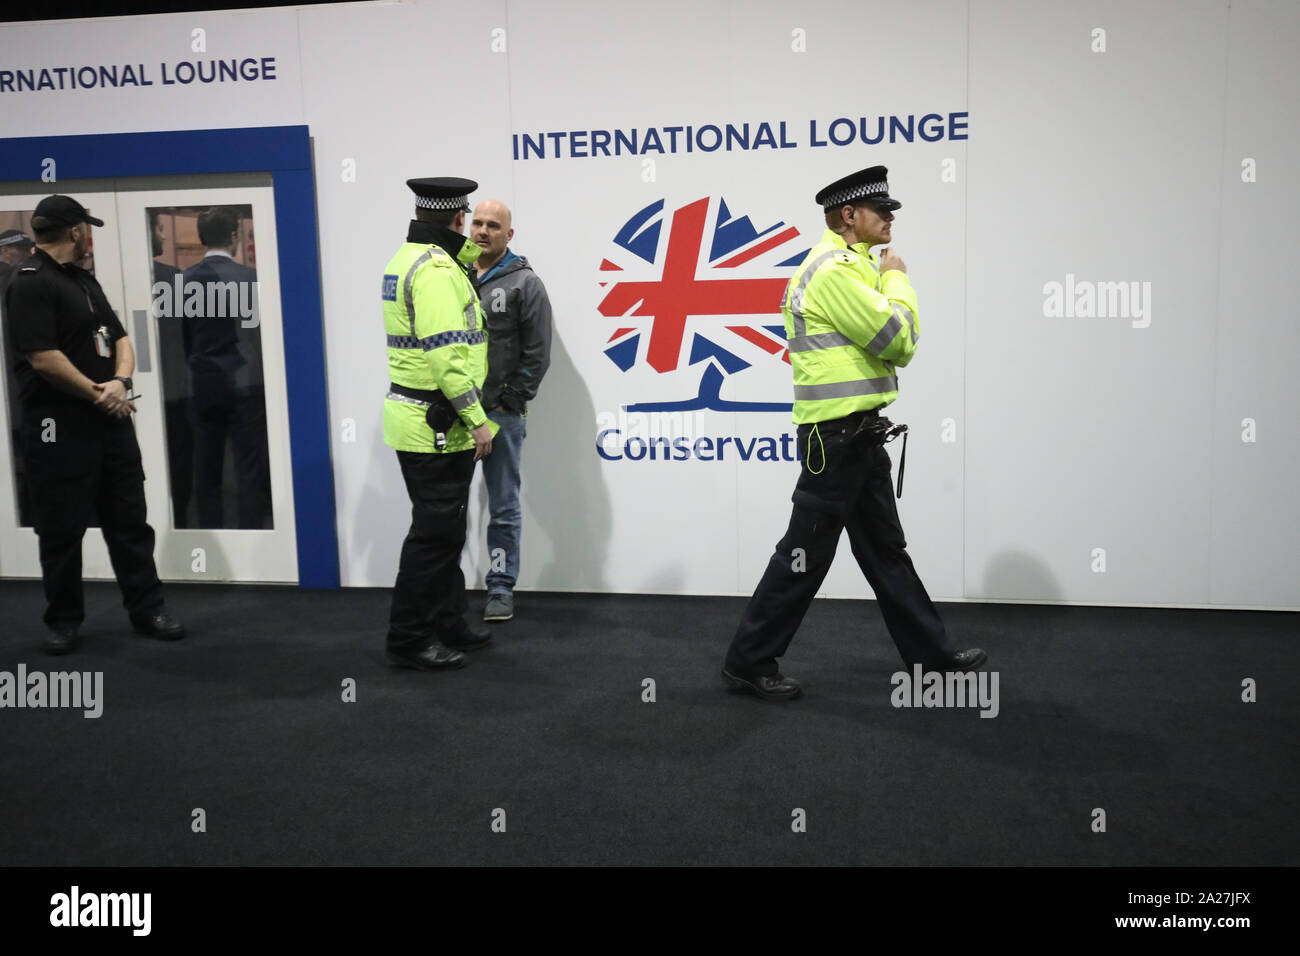 Police arrive at the Conservative Party Conference after a 'small misunderstanding' when an attendee, believed to be Sir Geoffrey Clifton-Brown, MP for The Cotswolds, tried to enter the International Lounge at the Manchester Convention Centre without the relevant pass, triggering a lockdown. Stock Photo